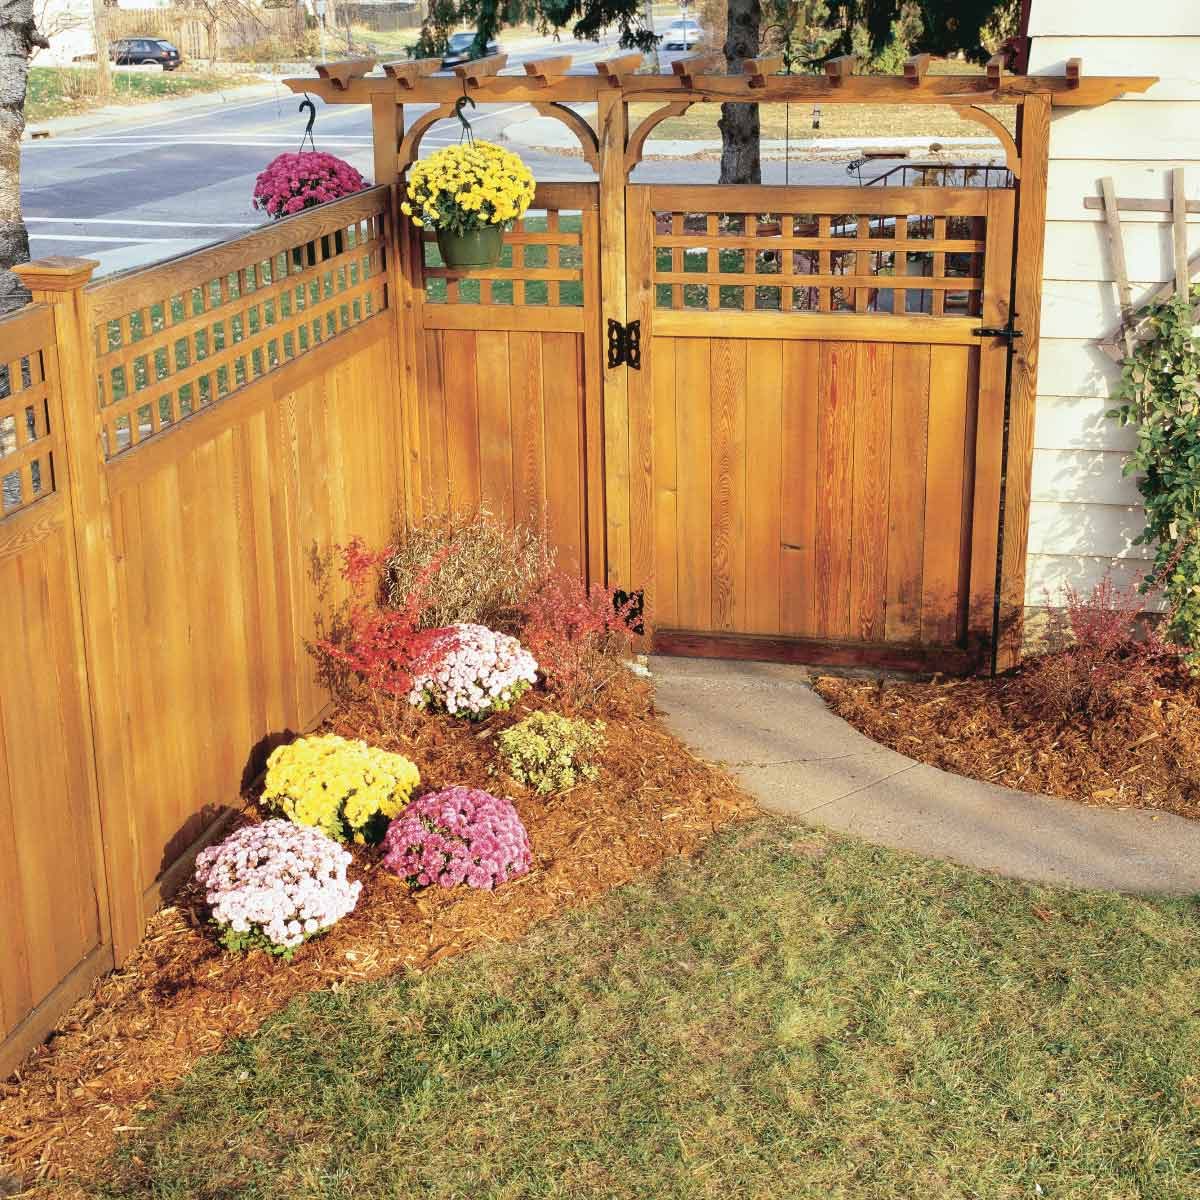 5 Common Problems You Can Solve by Repairing Your Garden Fence